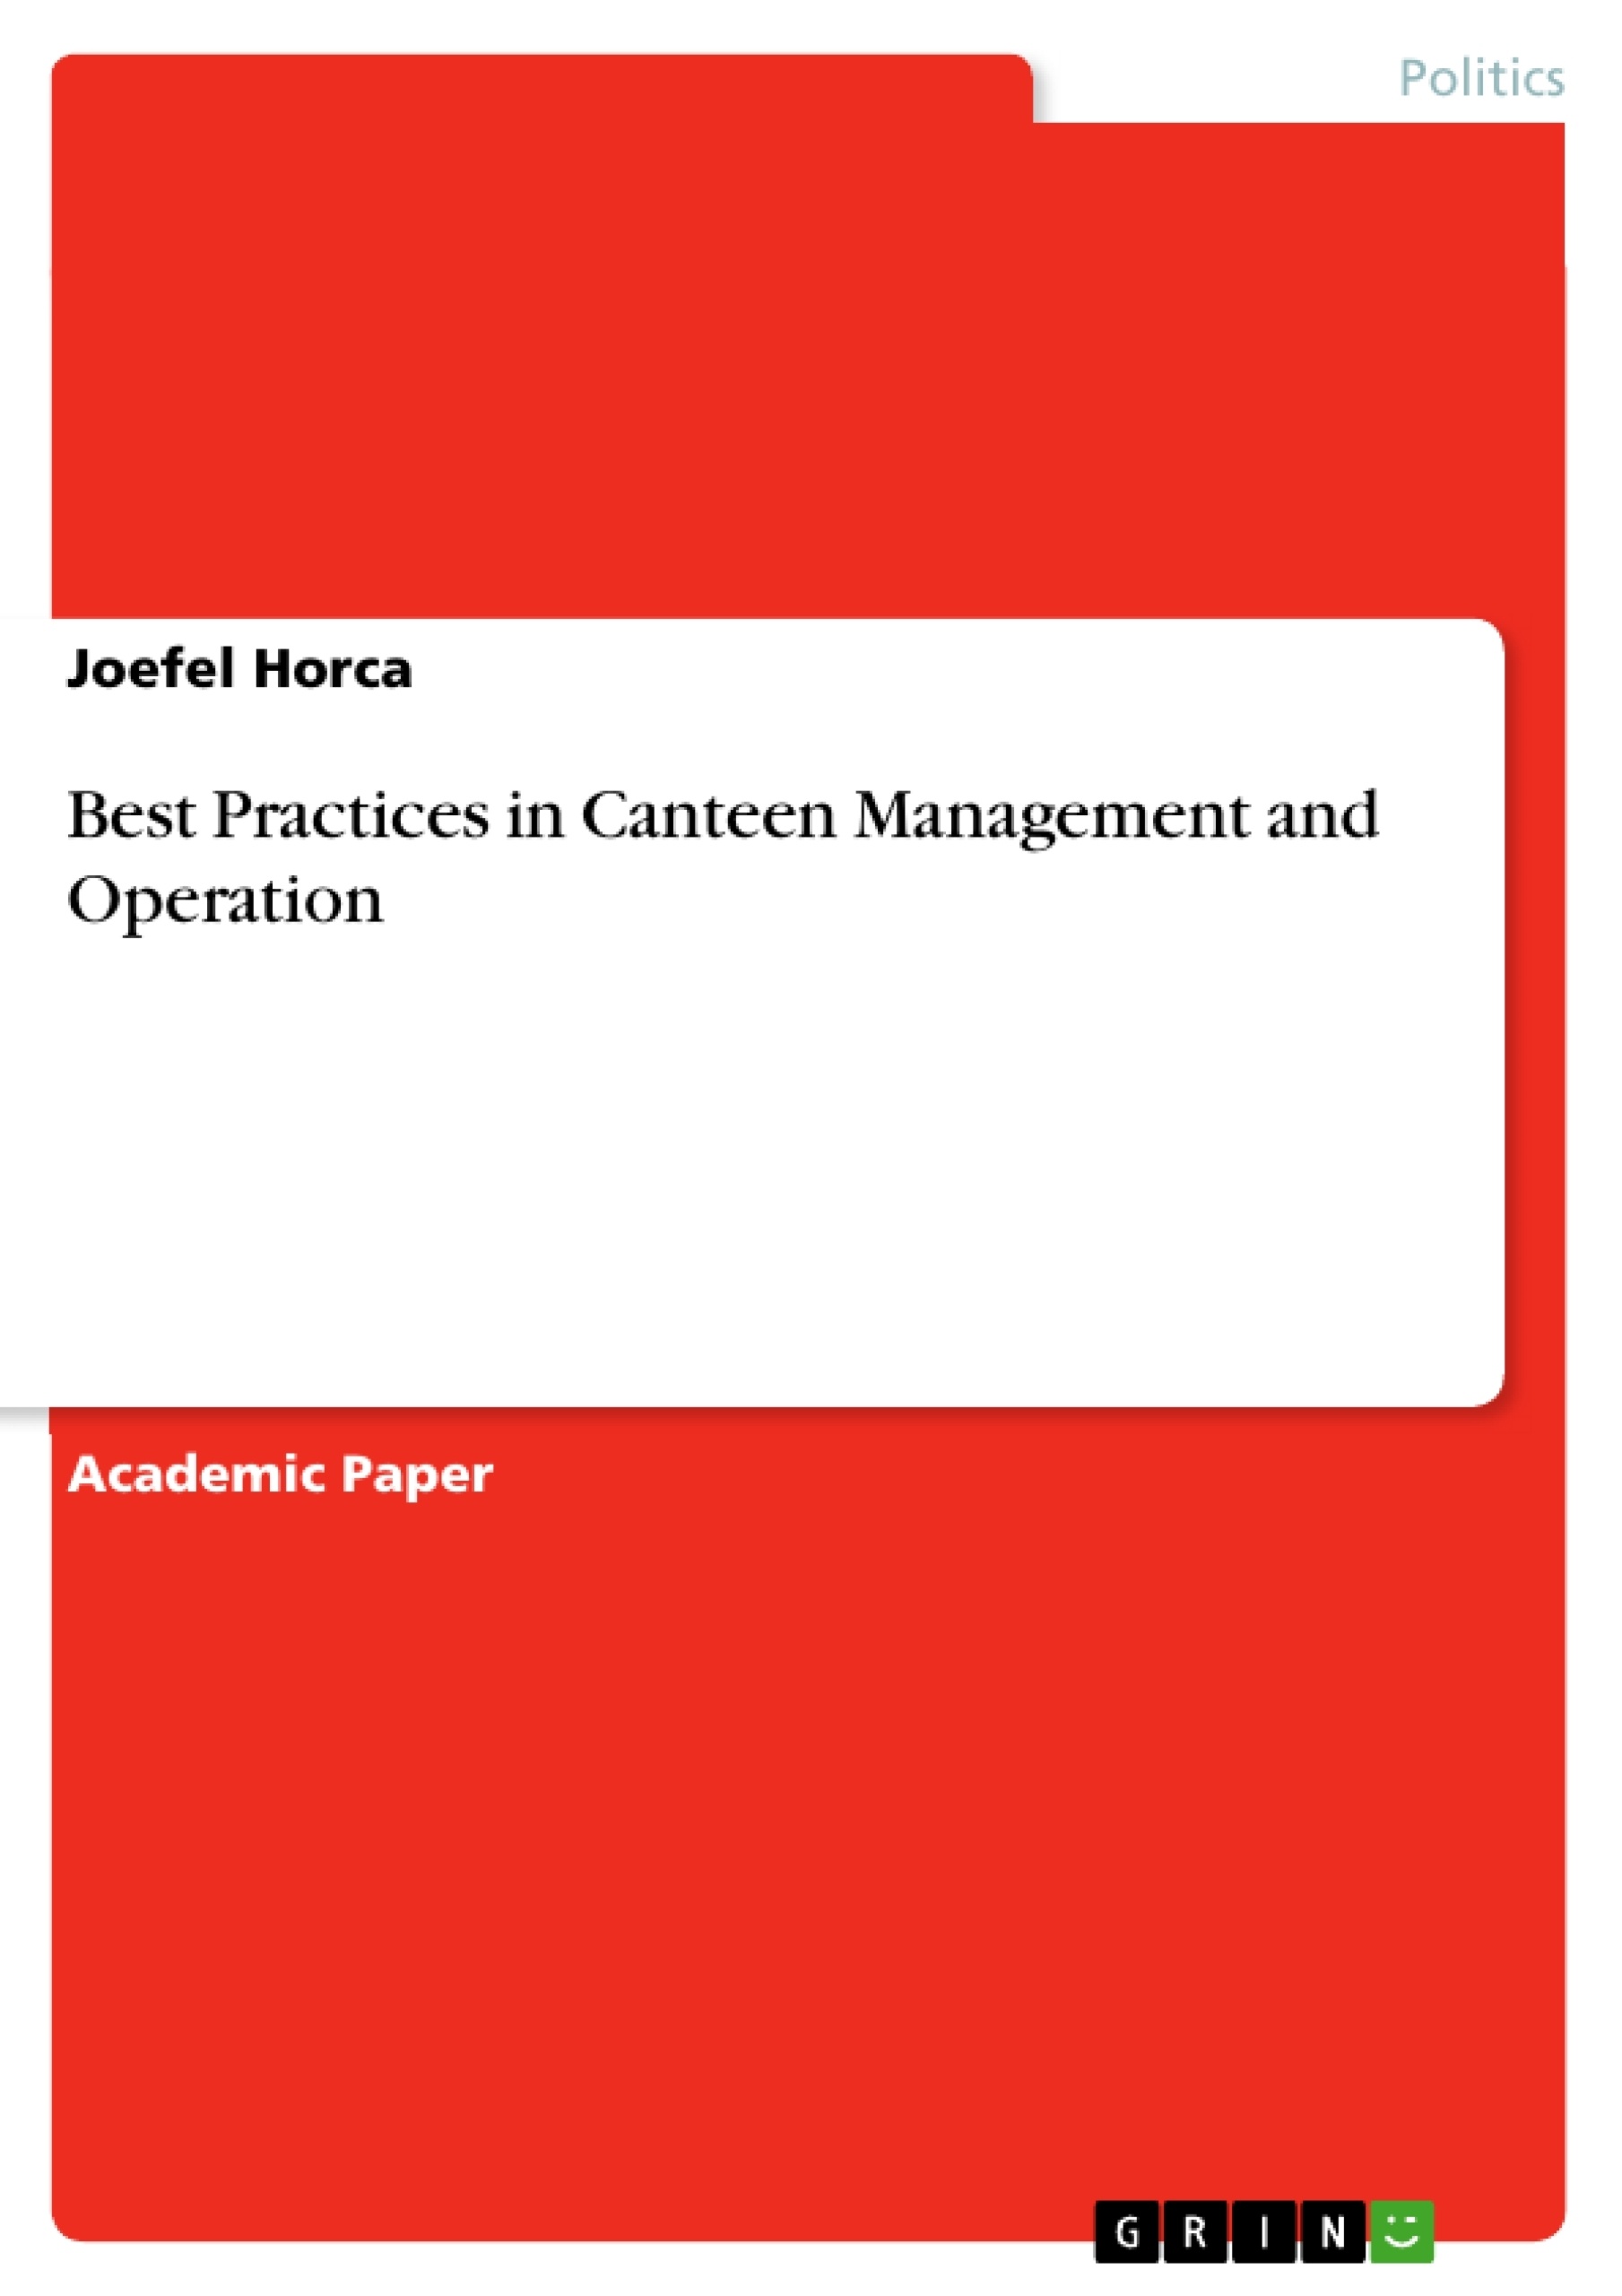 Titre: Best Practices in Canteen Management and Operation